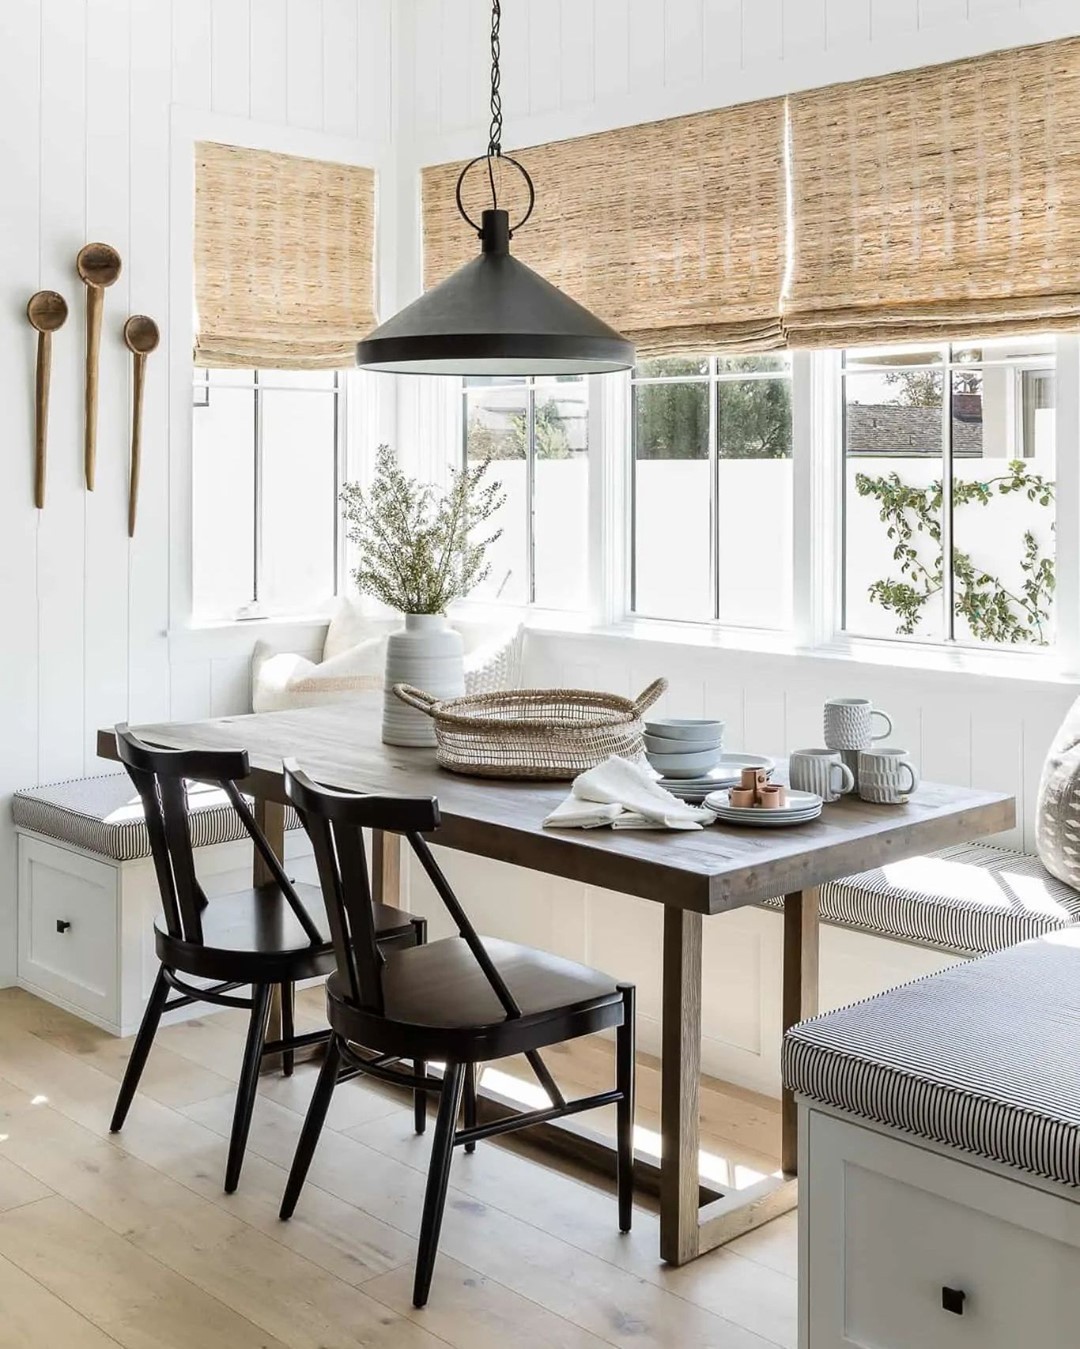 10 Inspiring Banquette Seating Ideas for Small Dining Areas